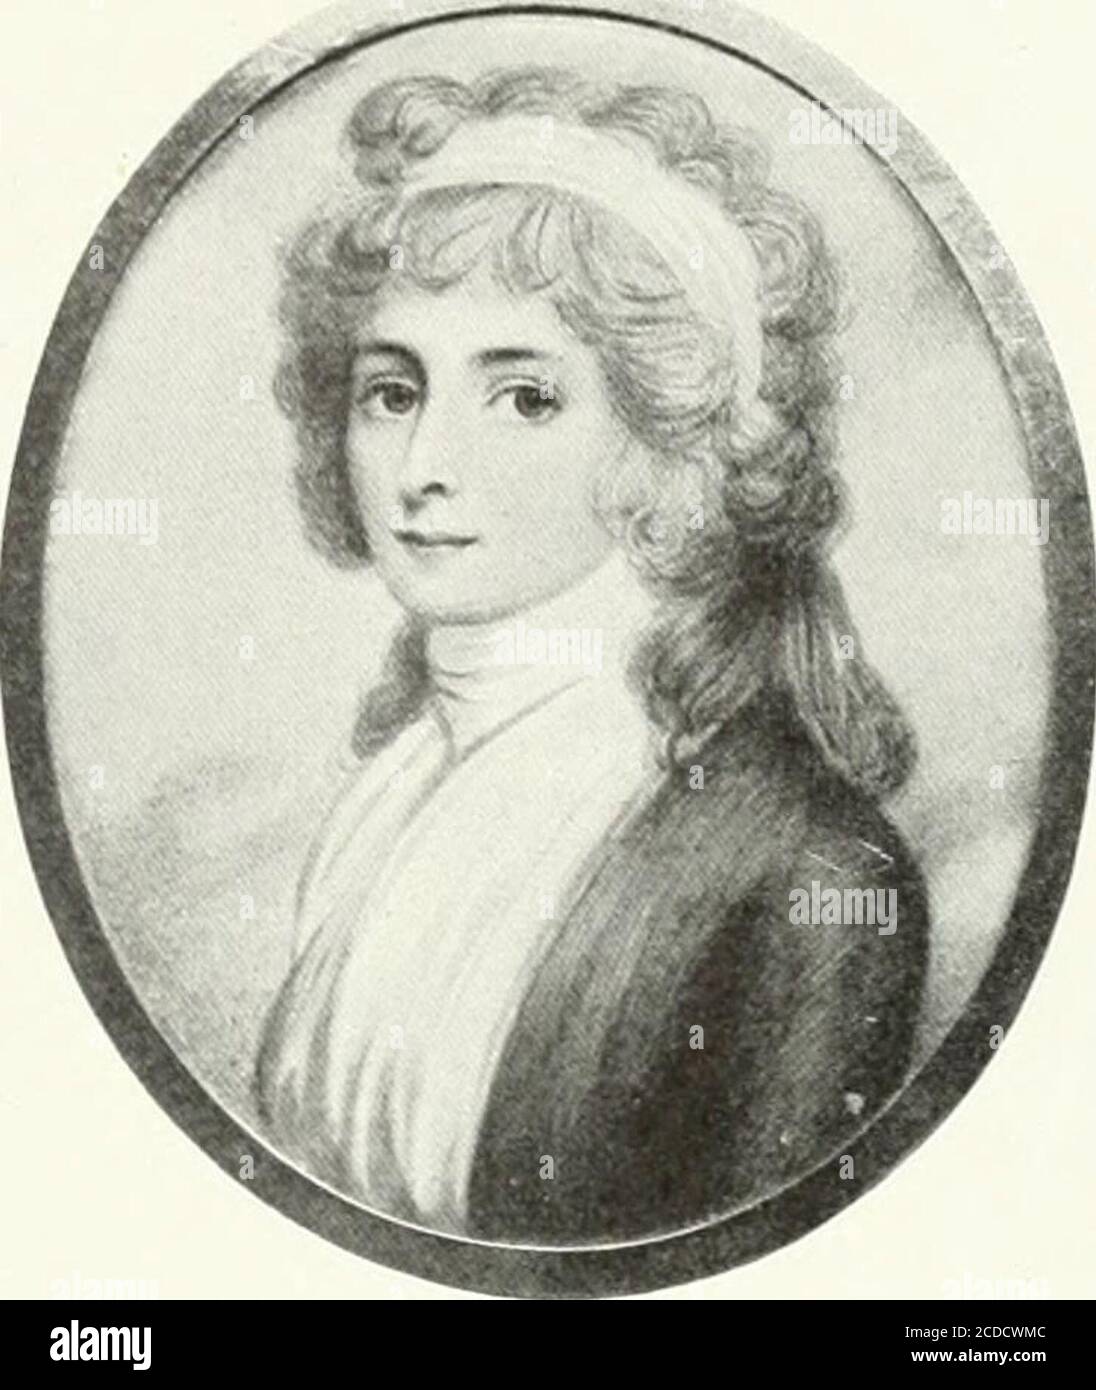 . Studio international . JAMES ANTHONY, JUNIOR BY GILBERT STUART (Collection o* Miss Mary B. Smith) Miss Mary B. Smith, Colonel Tobias Lear, byCottoni, lent by Mrs. Wilson Eyre, Lady Northwick,by Andrew Plimer, lent by Mrs. Joseph Drexel,H. C. R., by Jean Baptiste Isabey, lent byMiss Cushman, a portrait of Patrick Henry, byLawrence Sully, lent by Gilbert S. Parker, Esq.,another of his wife by Thomas Sully, the painter ofthe portrait of Queen Victoria in the Wallace Collec-tion, lent by Gilbert L. Parker, M.D., and a portraitof Lady Erskine, by an unknown artist, should be. LADY NORTHWICK BY AN Stock Photo